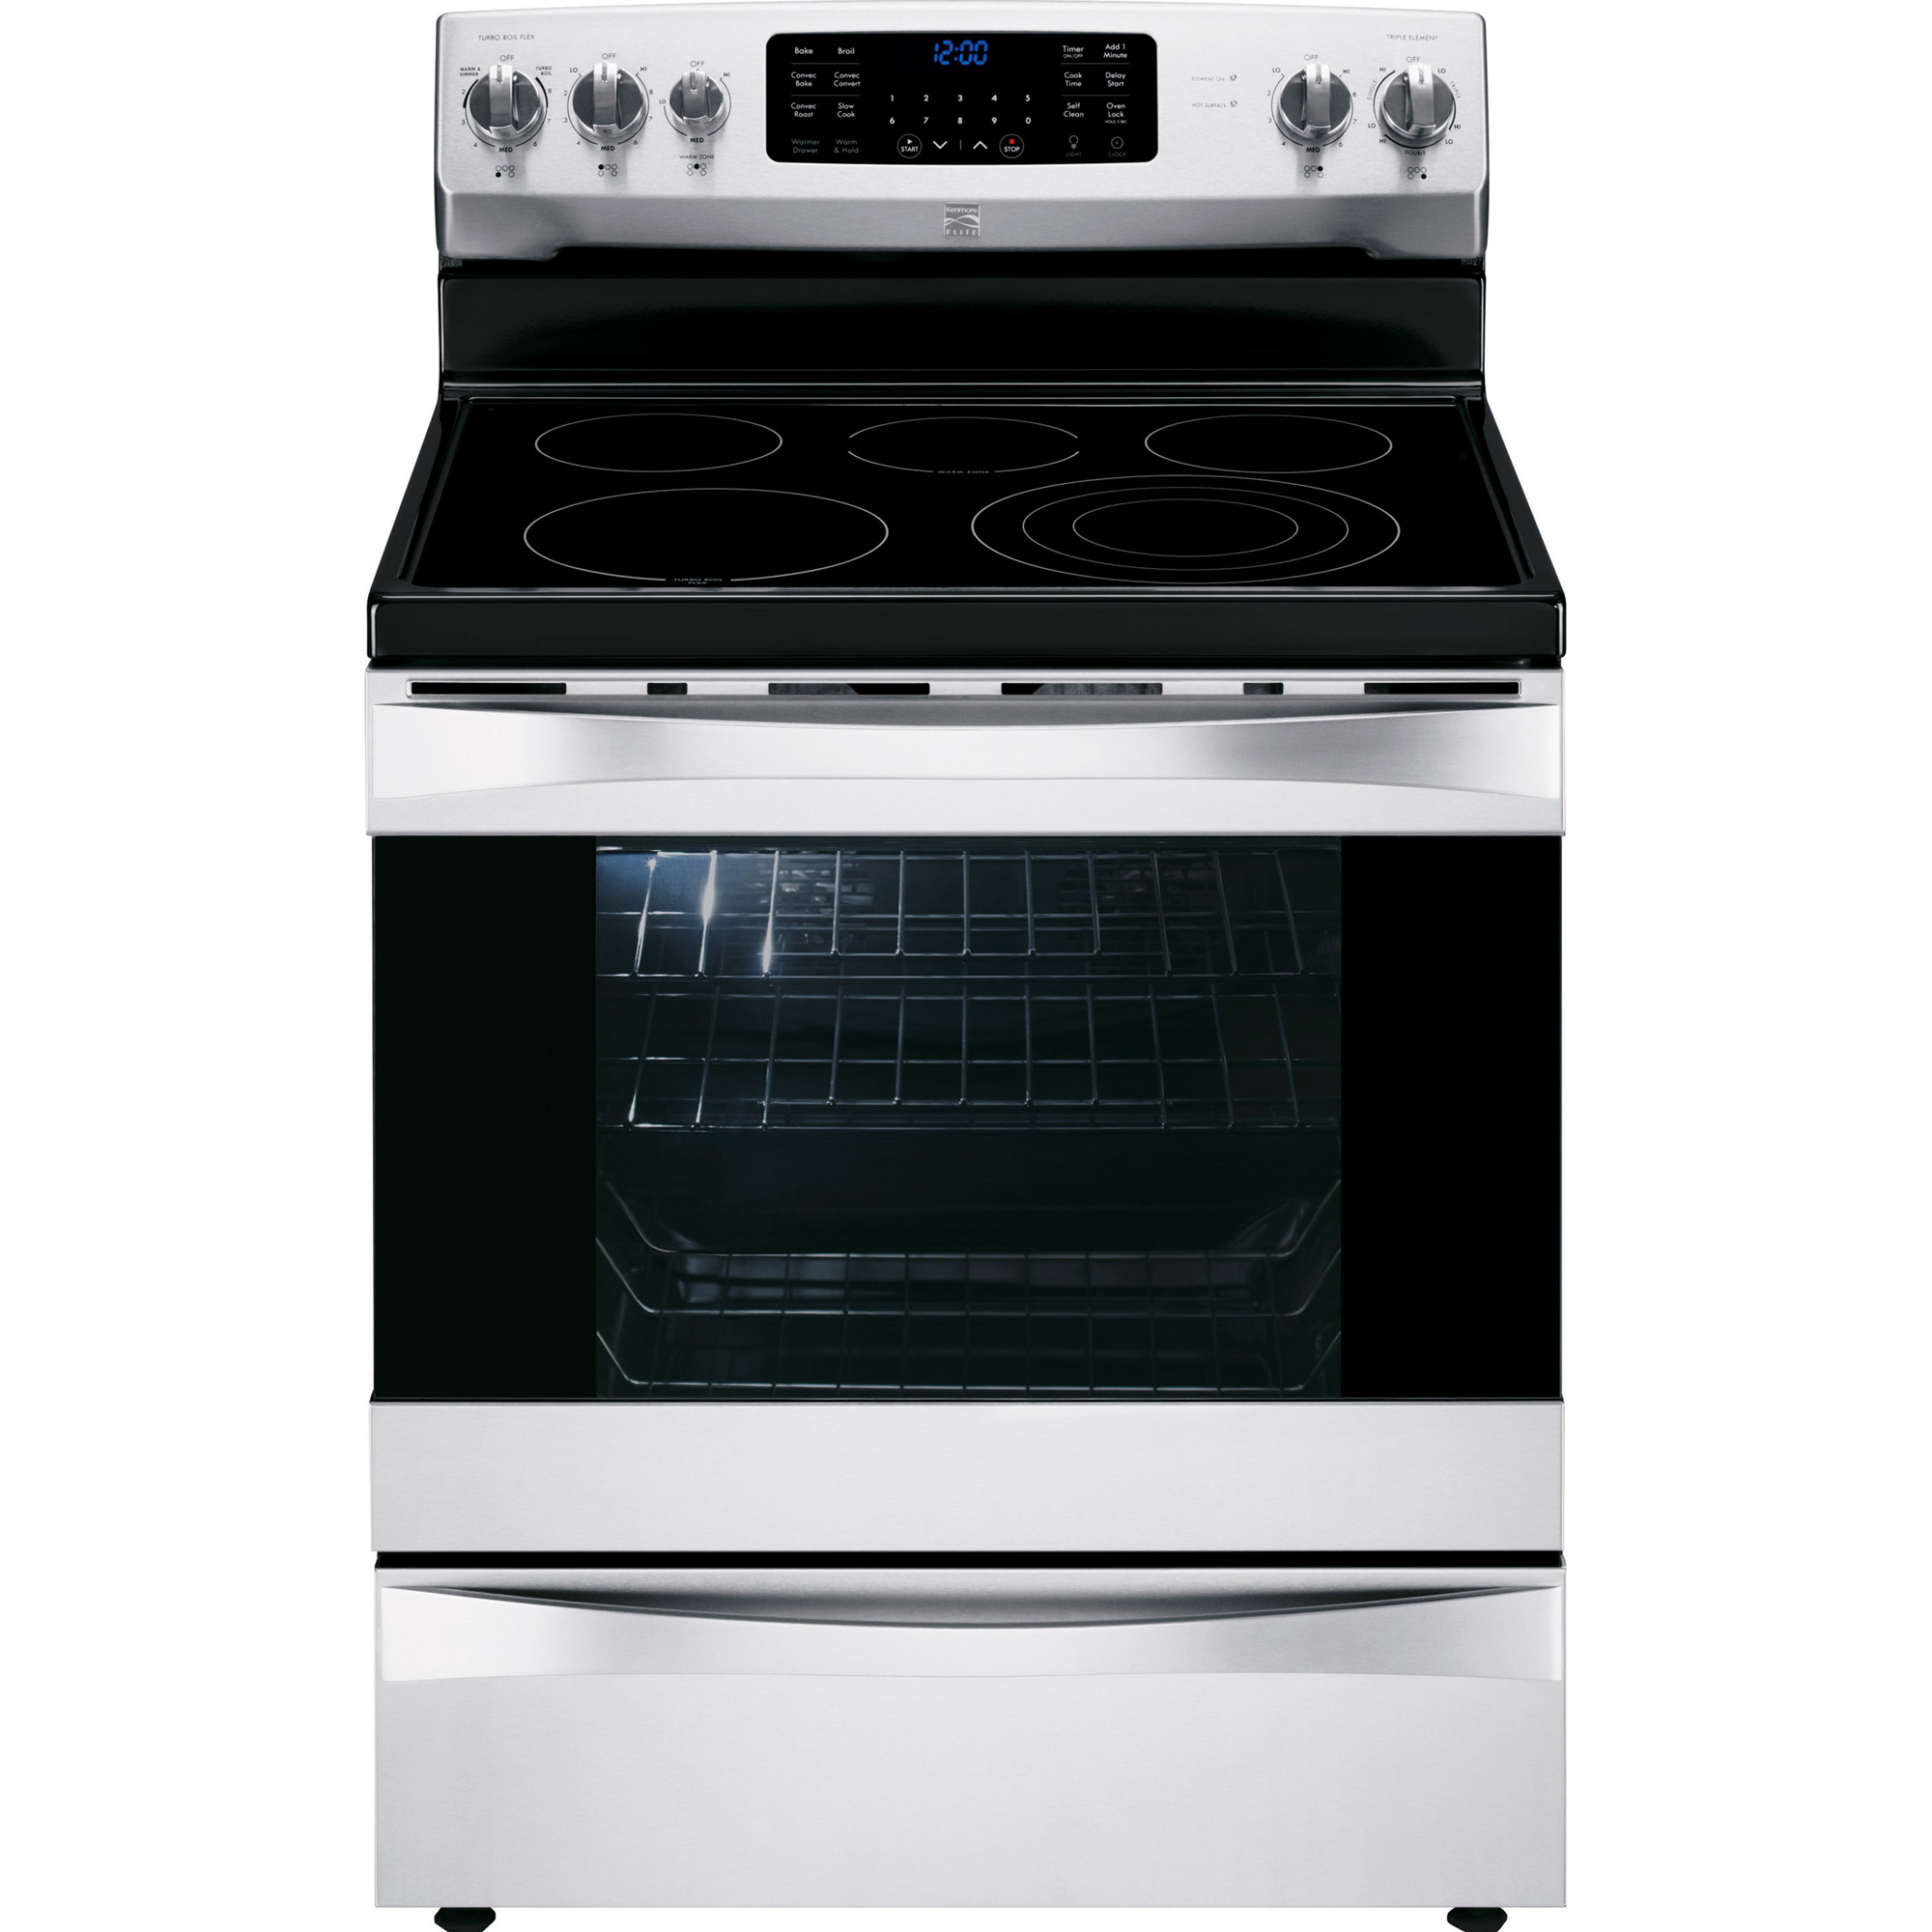 0012505508394 - 95053 6.1 CU. FT. ELECTRIC RANGE W/ DUAL TRUE CONVECTION - STAINLESS STEEL